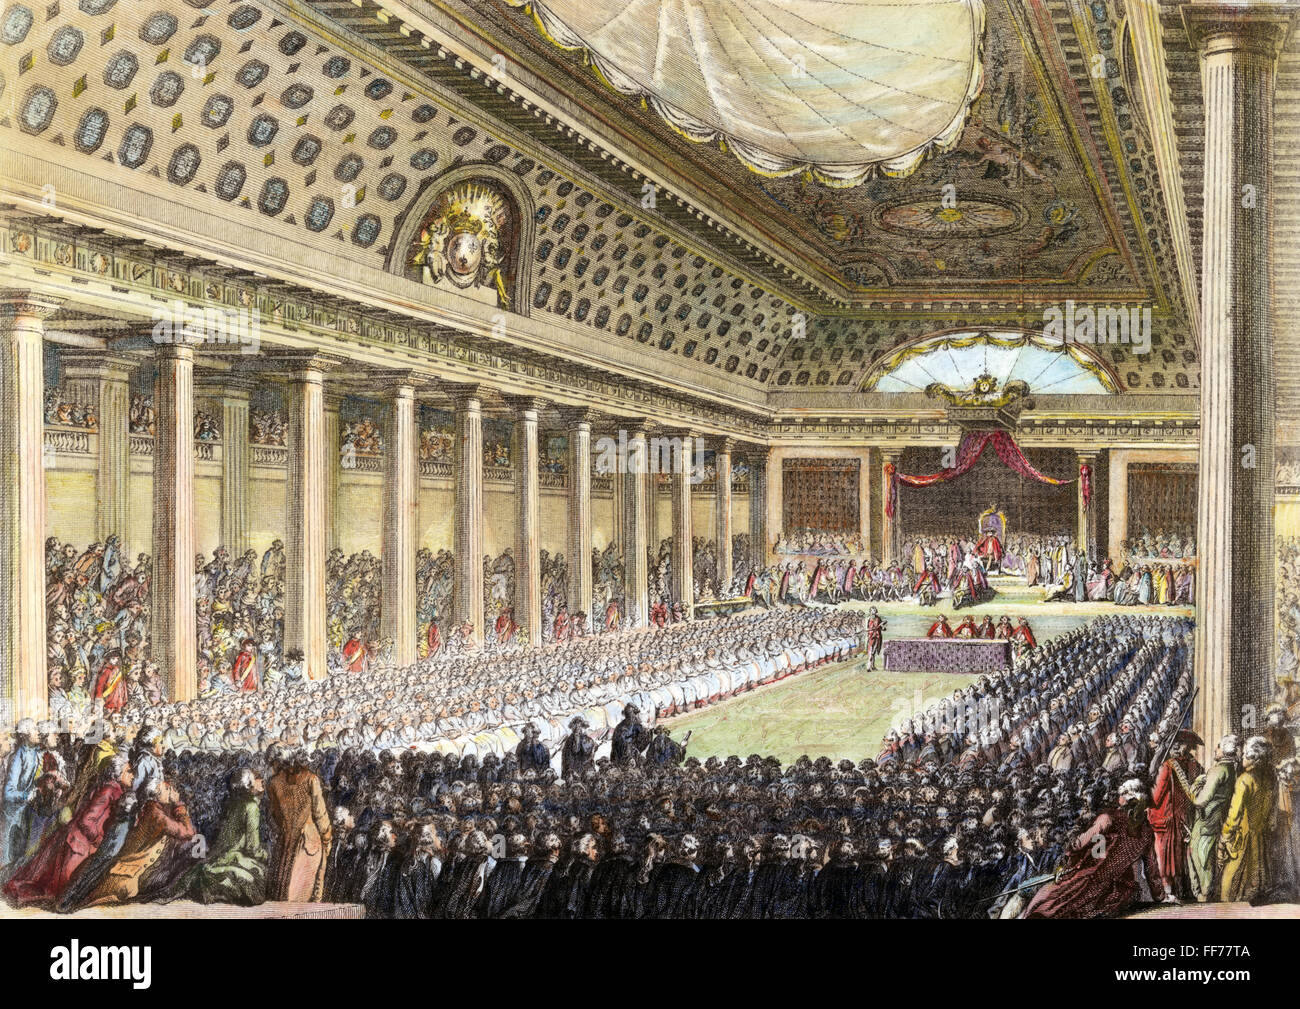 FRENCH REVOLUTION, 1789. /nKing Louis XVI presiding at the opening of the Estates-General in Versailles on 5 May 1789. Contemporary Dutch engraving. Stock Photo